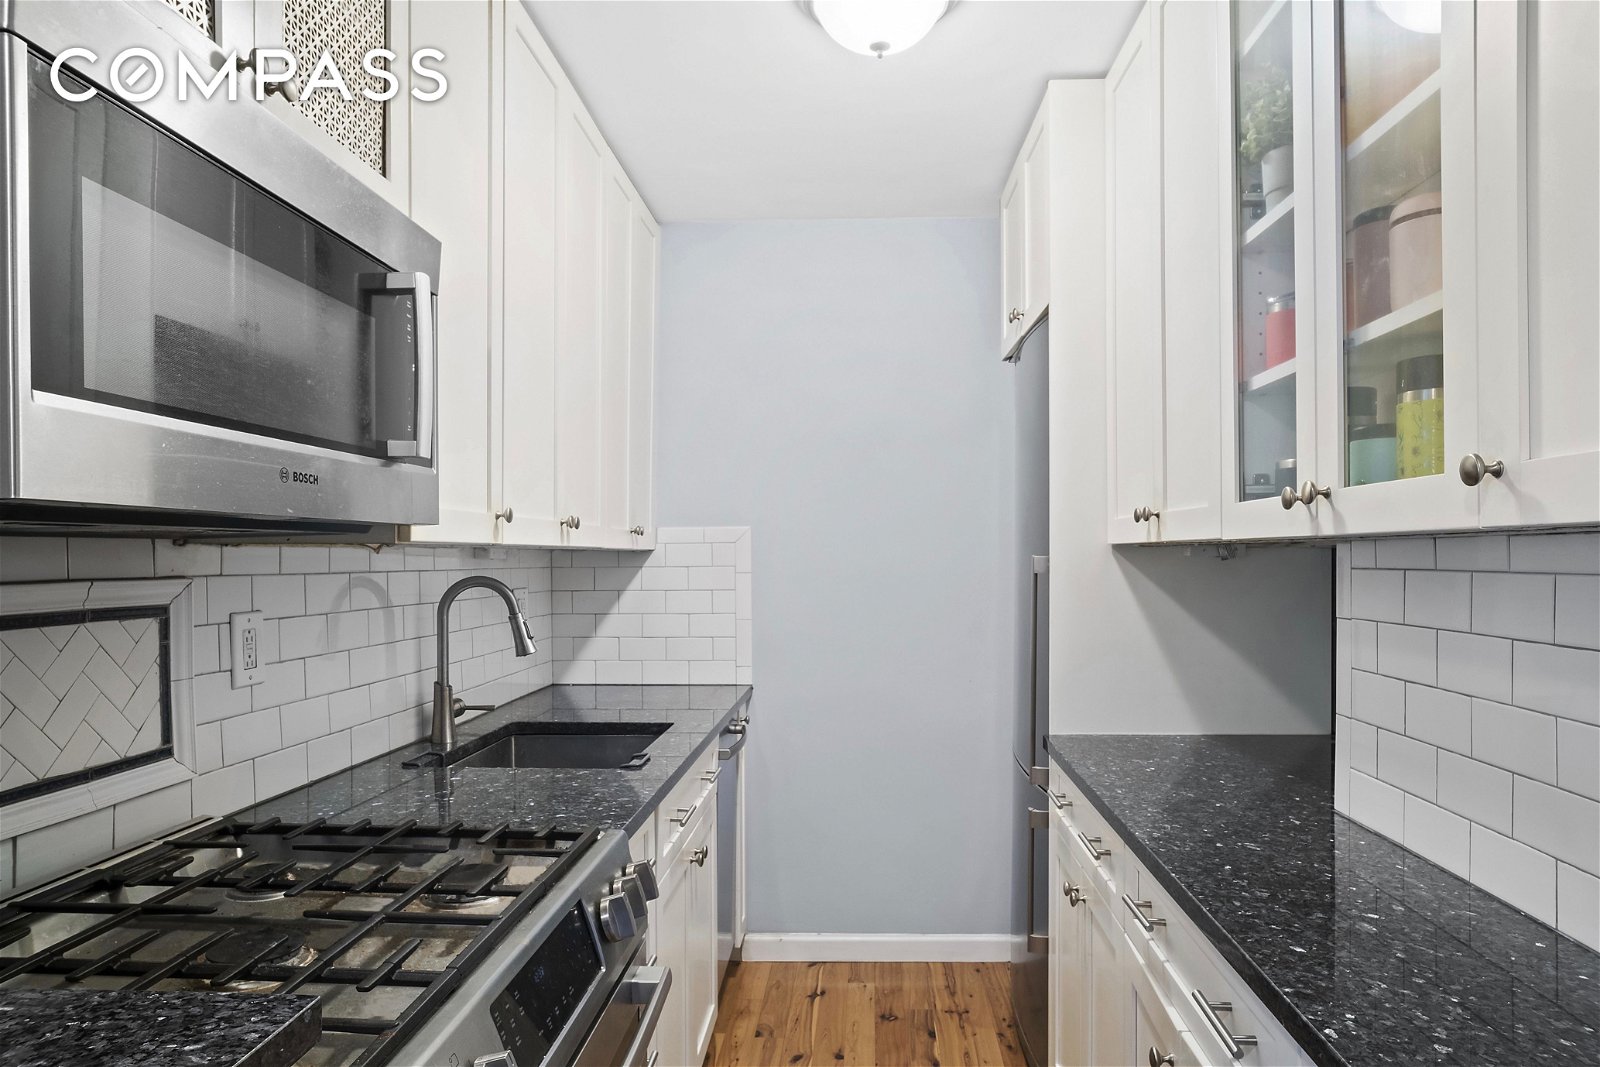 Real estate property located at 363 76th #7-K, New York, New York City, NY